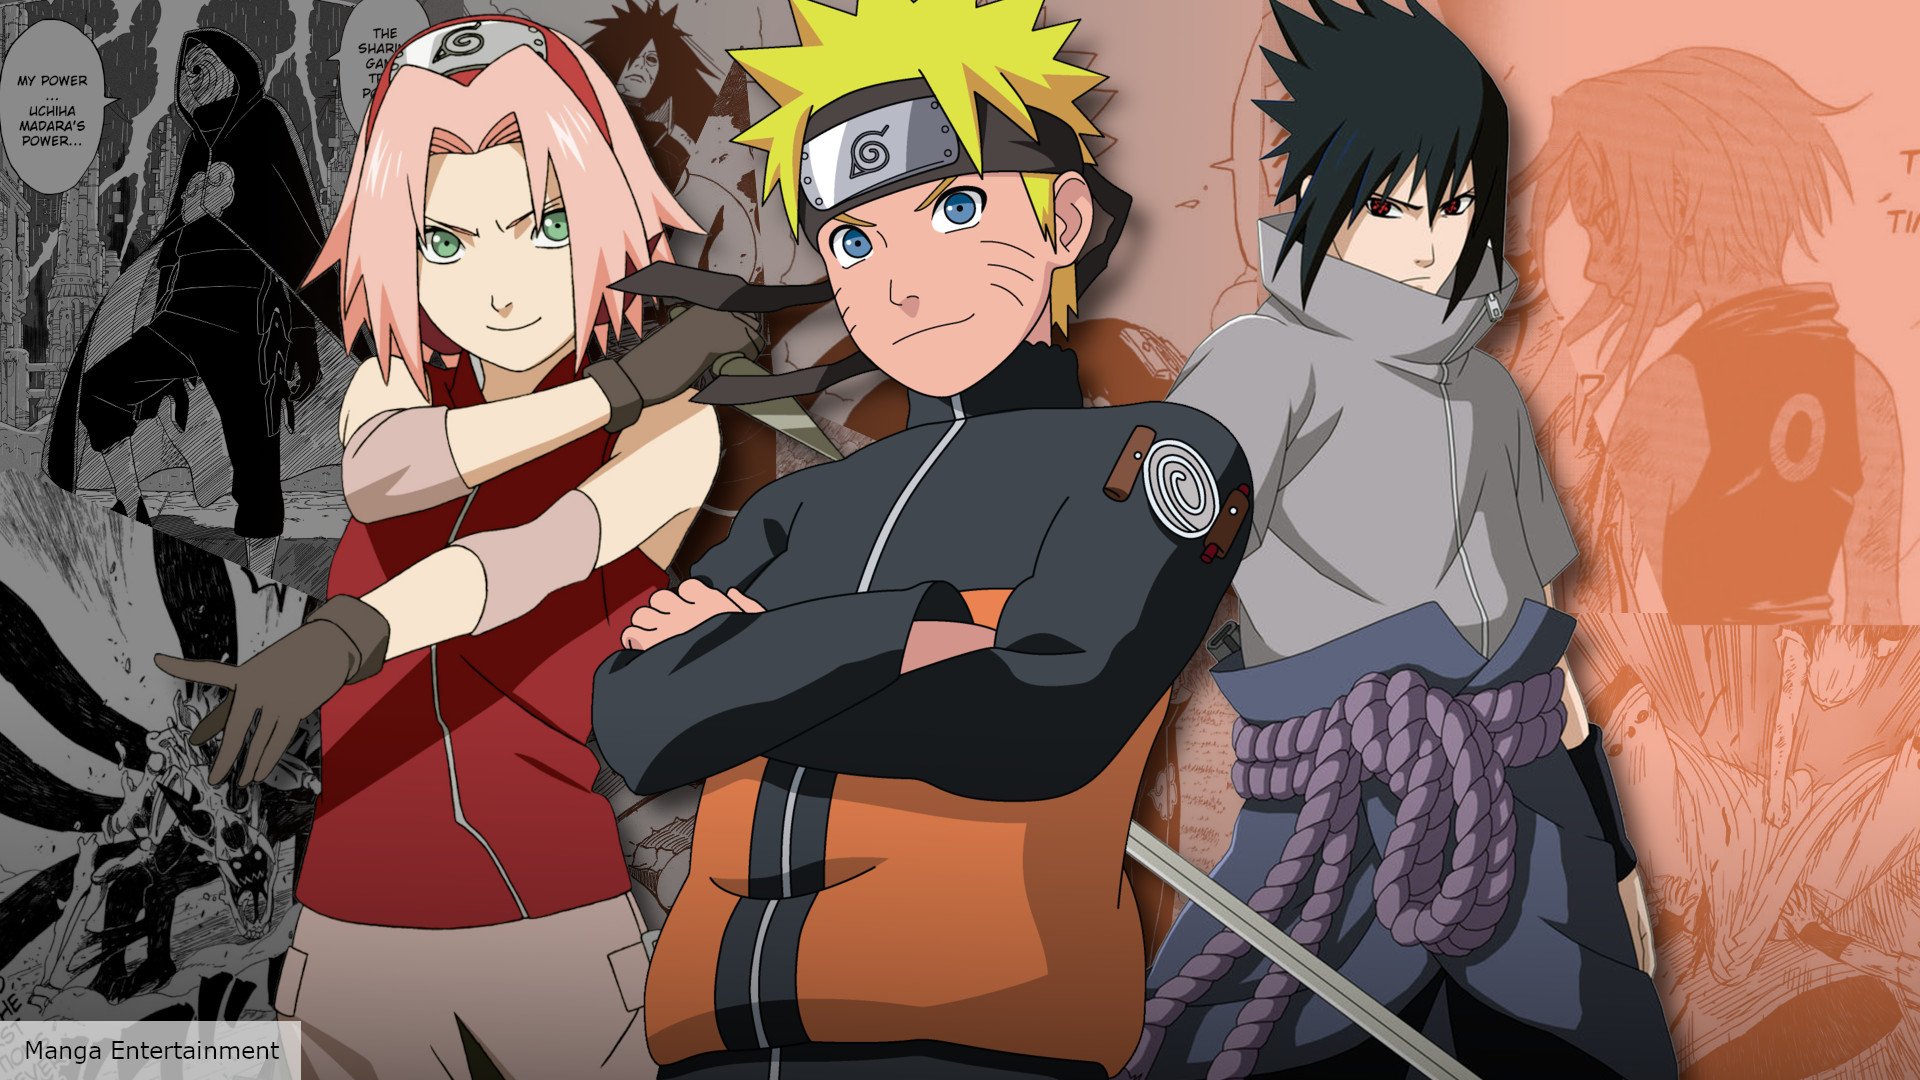 All 7 Hokage and Their Powers Explained! (Naruto Shippuden